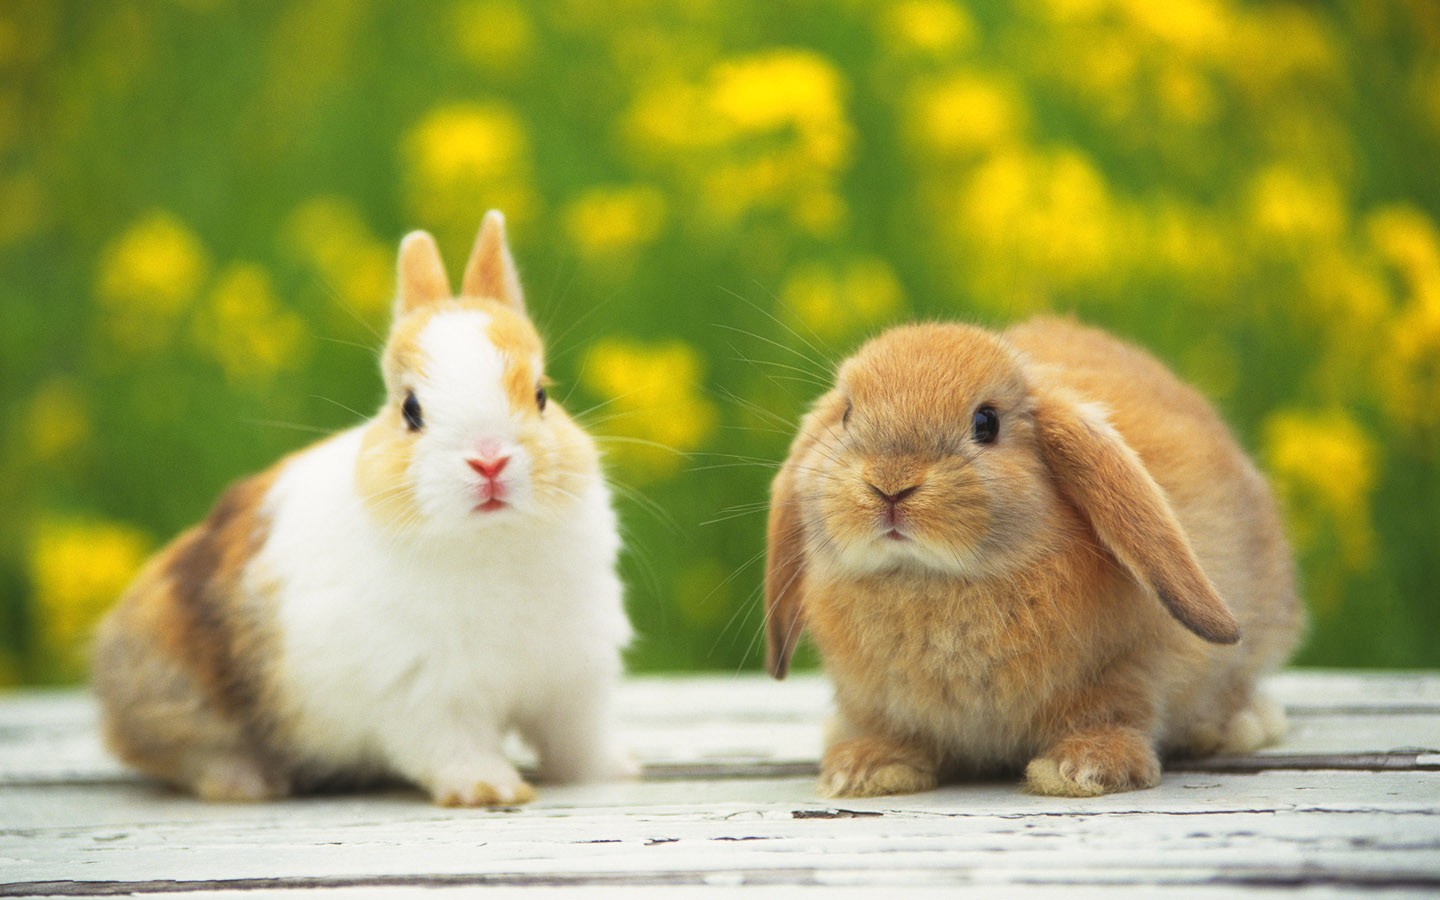 Cute Baby Rabbits 8433 Hd Wallpapers in Animals   Imagescicom